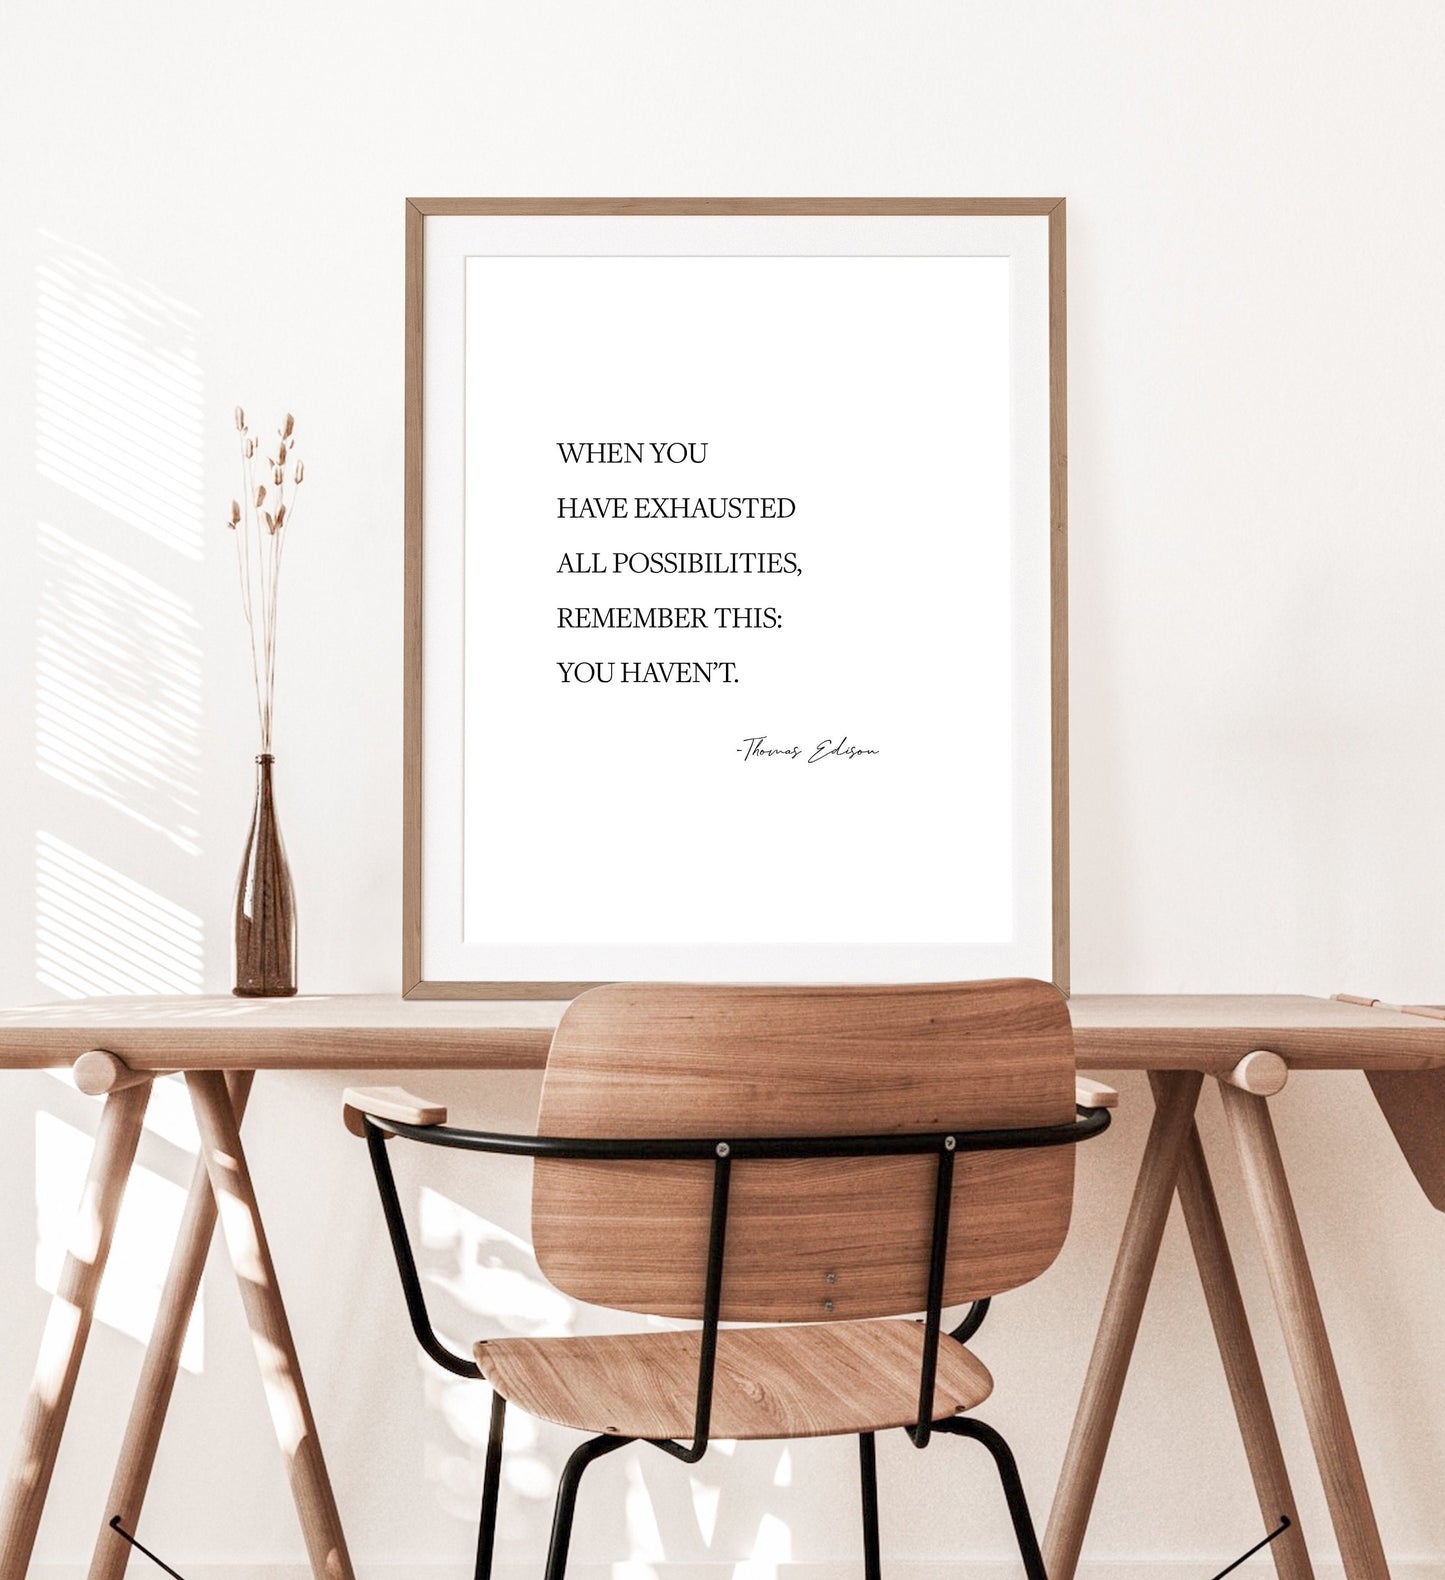 When you have exhausted all possibilities,Thomas Edison quote,Inspirational quote,Motivational print,Possibilities quote,Thomas Edison